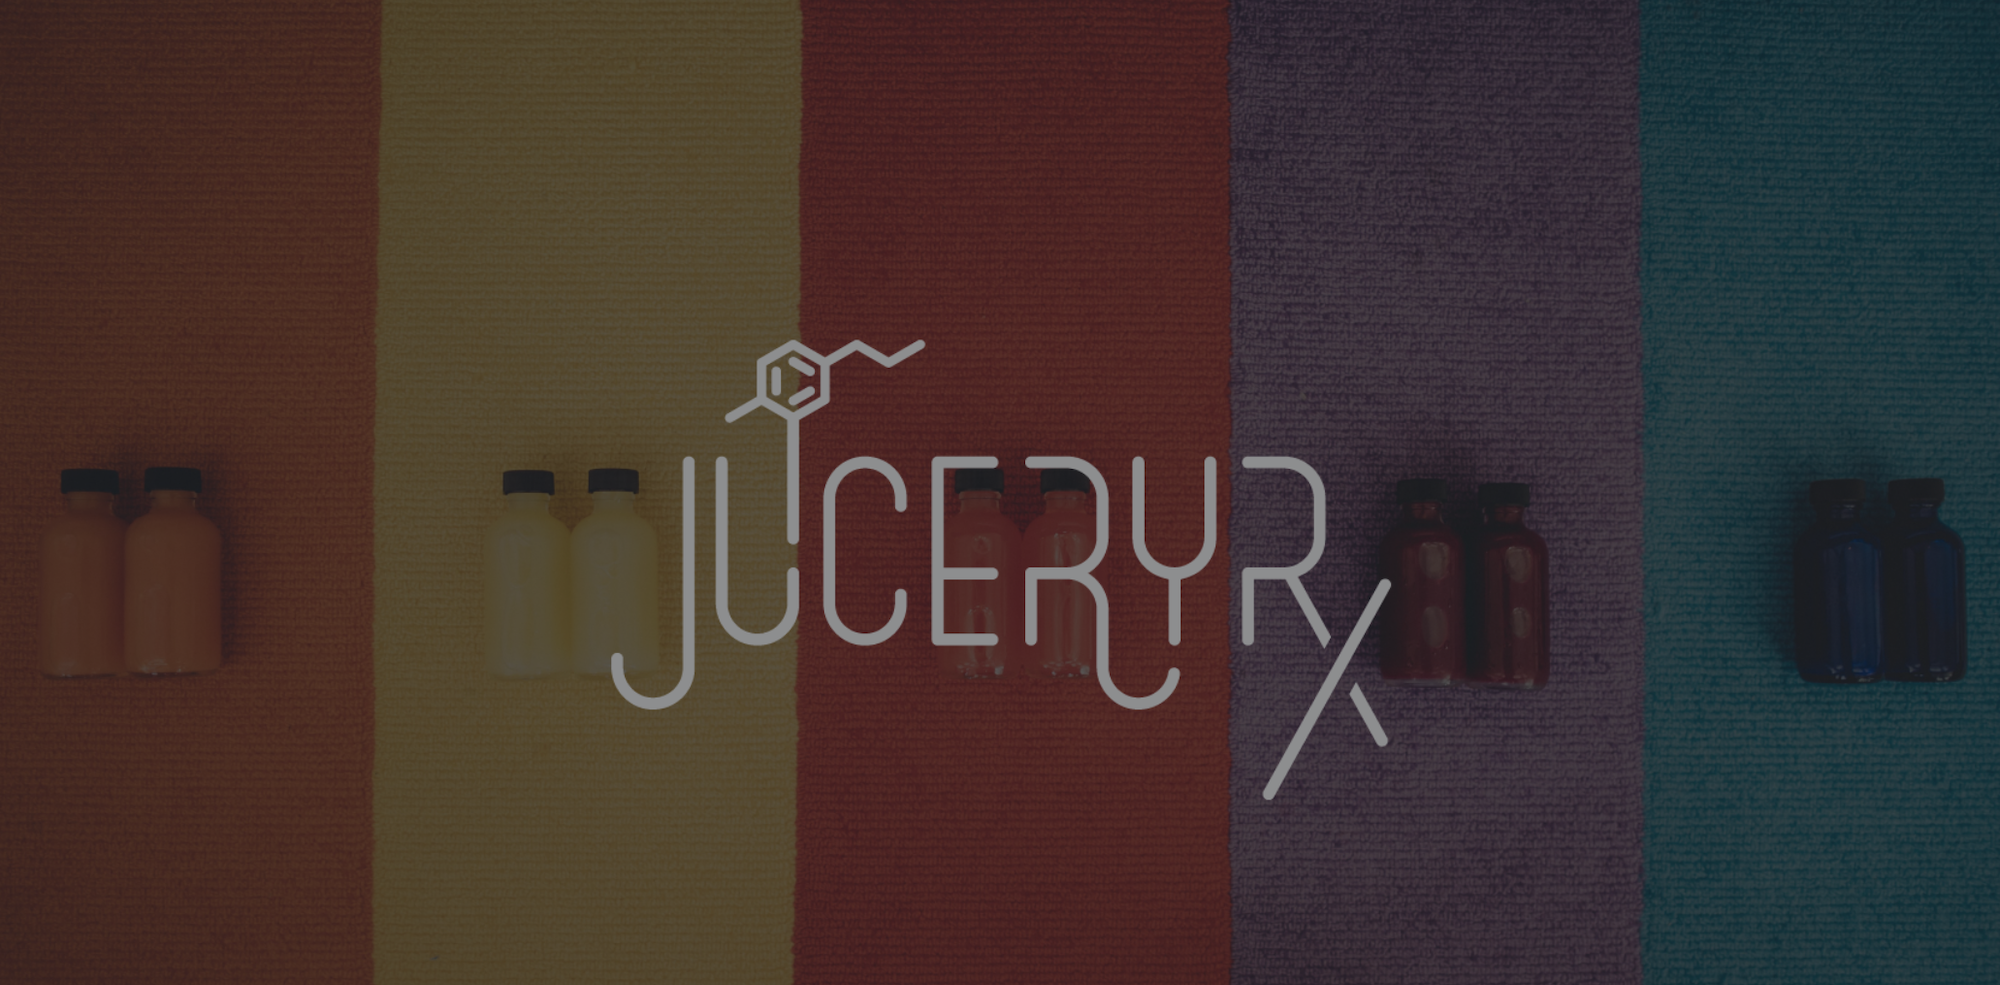 White JuiceryRX logo Creative Marketing with dimmed background showing multiple colors of bottles laying on colored strips